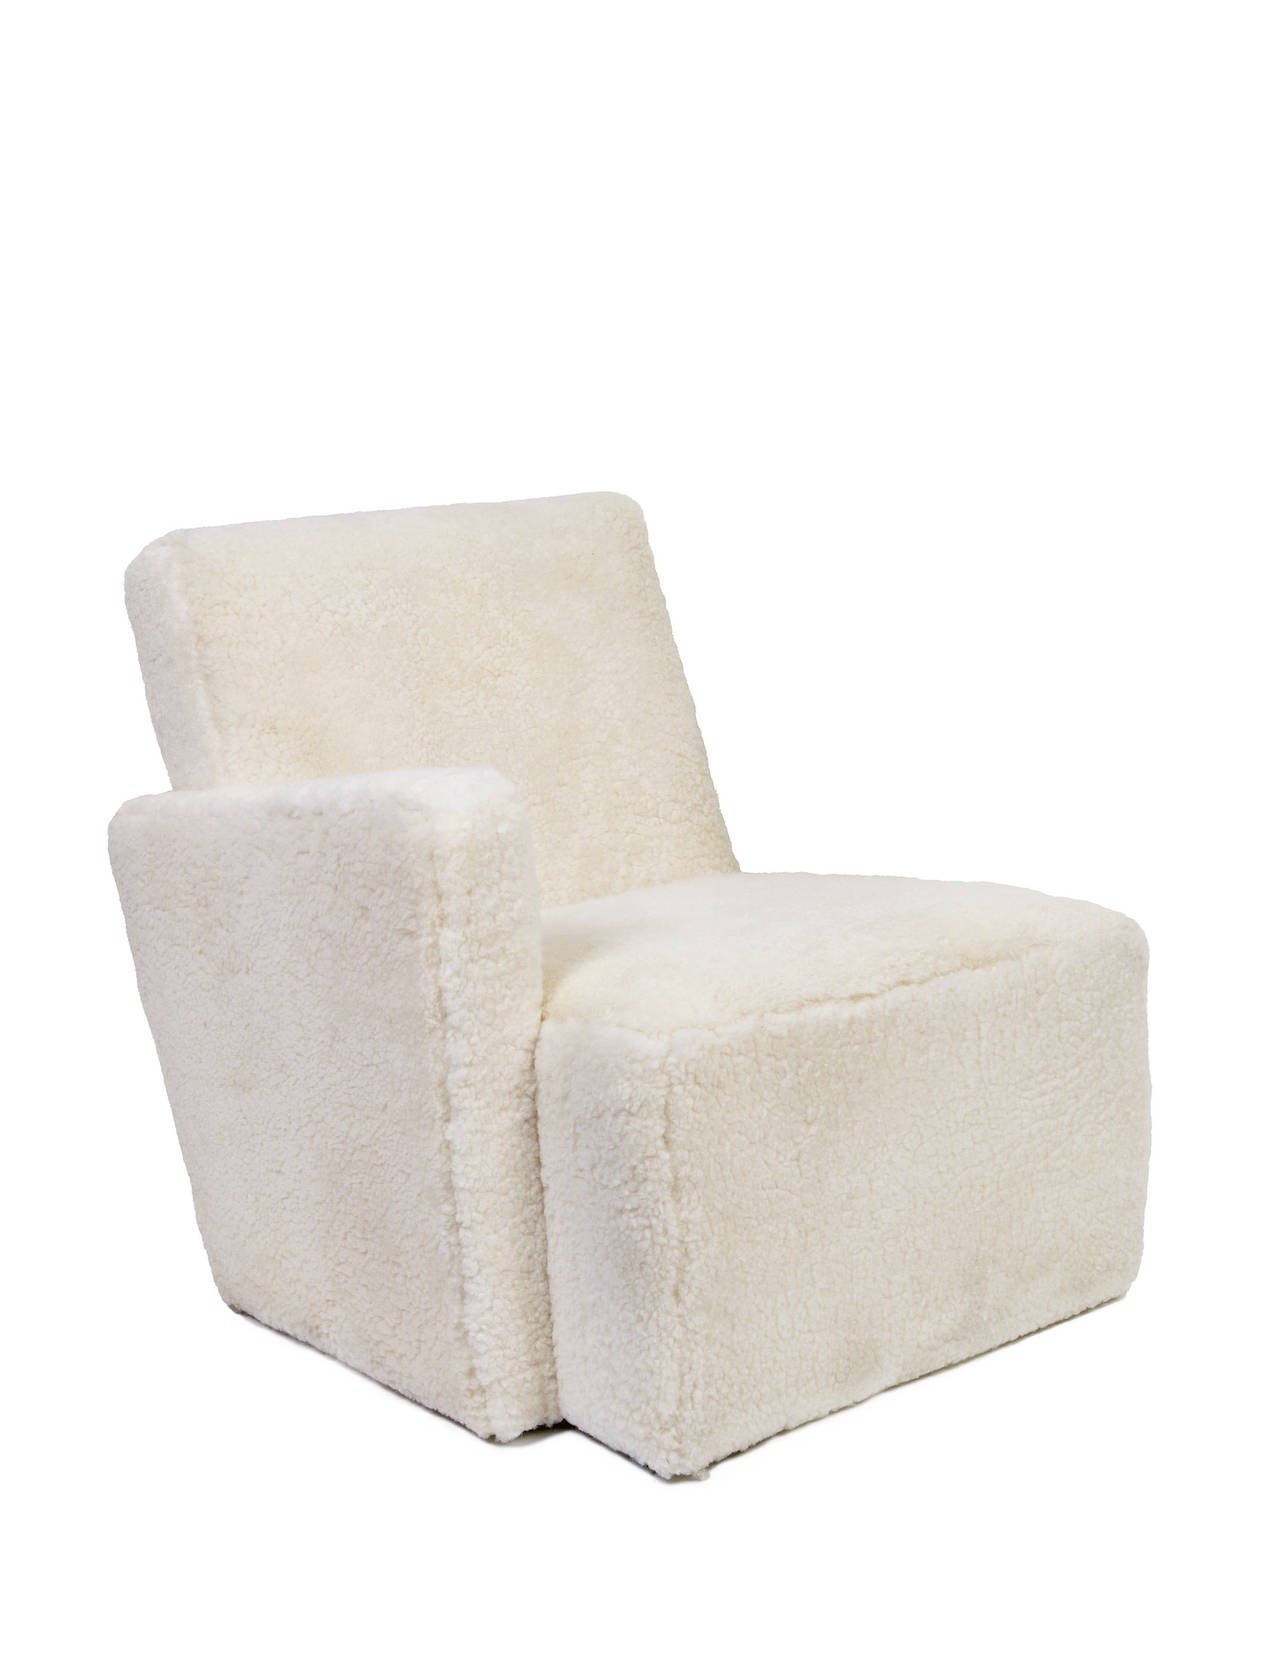 White armchair Petit Frank, in sheepskin, designed by Hervé Langlais for Galerie Negropontes, it is a tribute to the Jean-Michel Frank armchair in sheepskin.
For its first collection, Galerie Negropontes presented furnitures design by Hervé